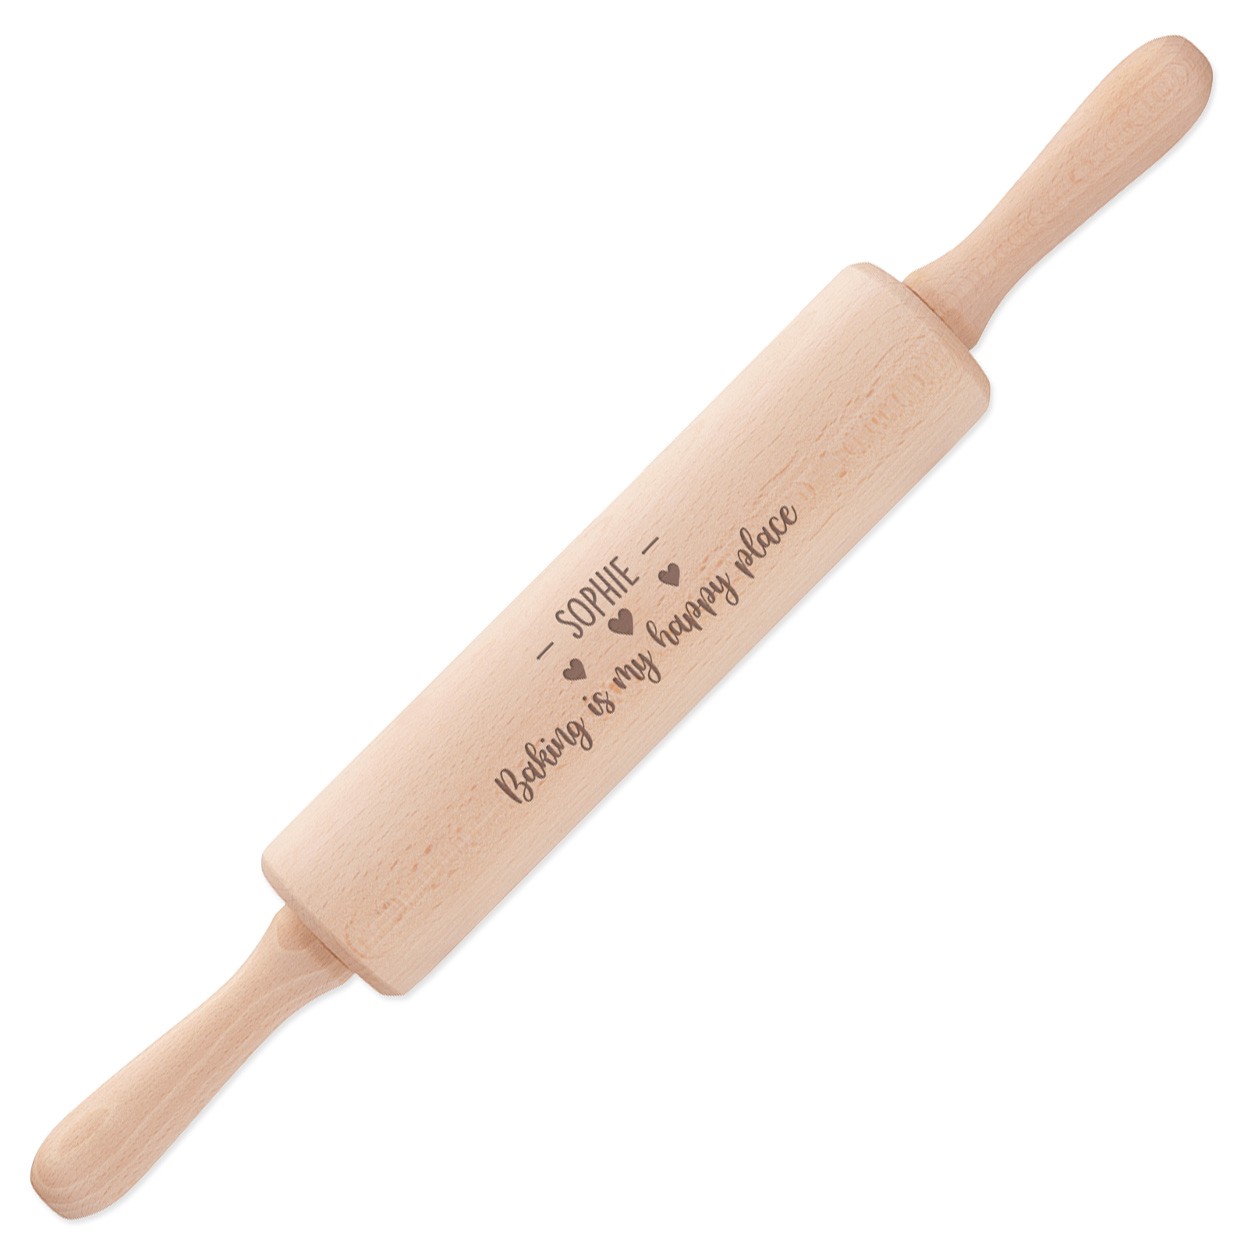 Personalised Rolling Pin Baking Is My Happy Place Revolving Wooden Any Name Custom Baking